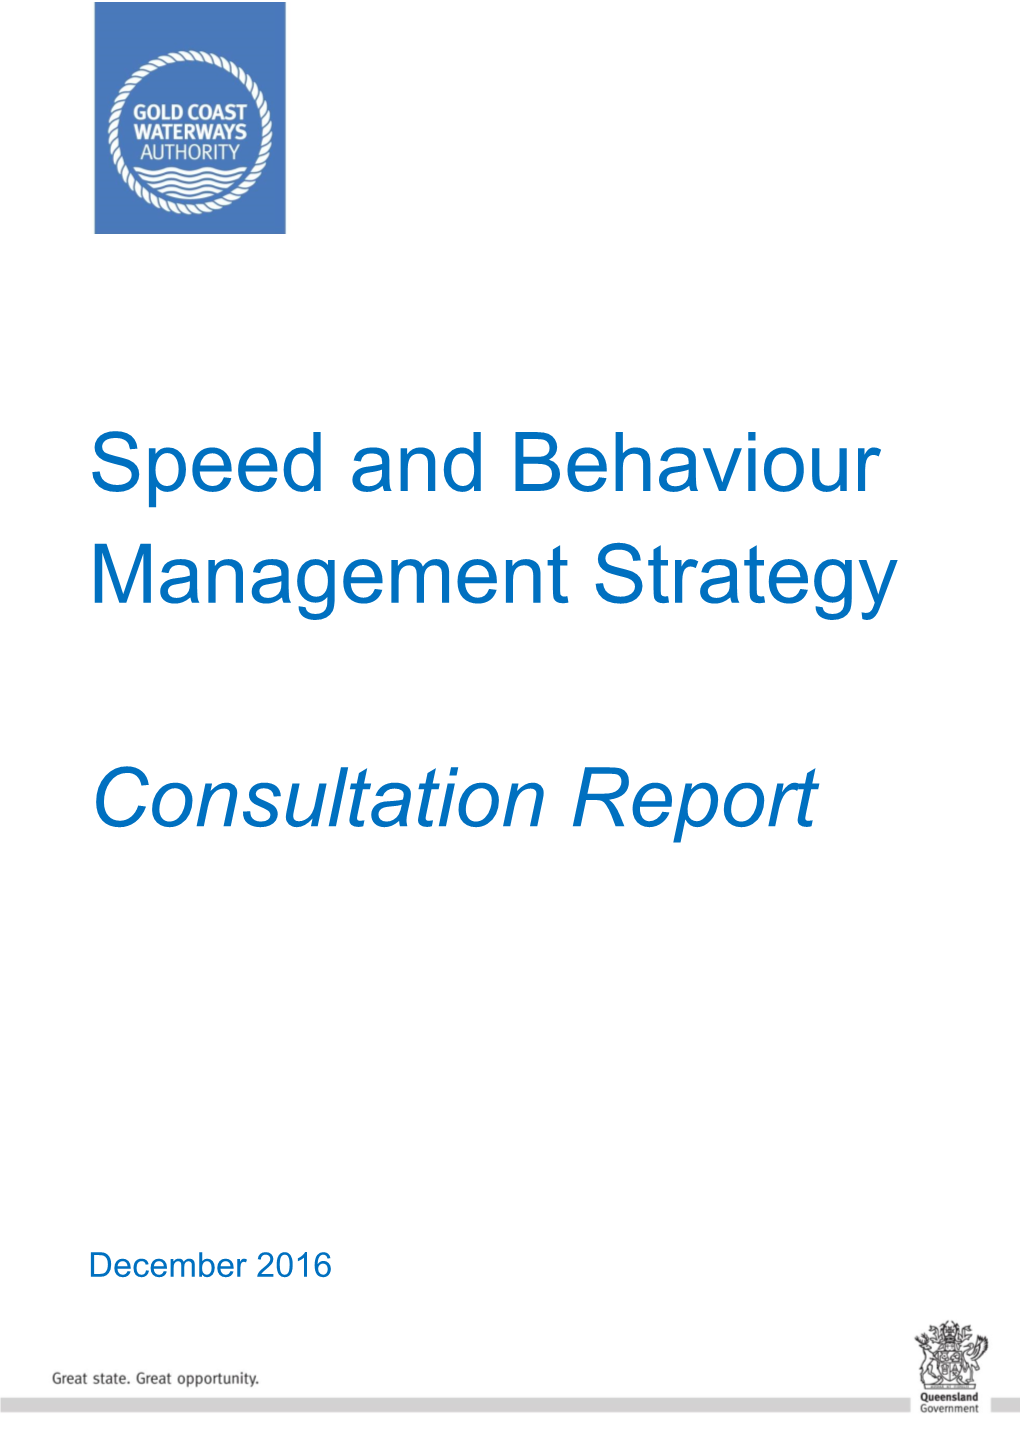 Speed and Behaviour Management Strategy Consultation Report